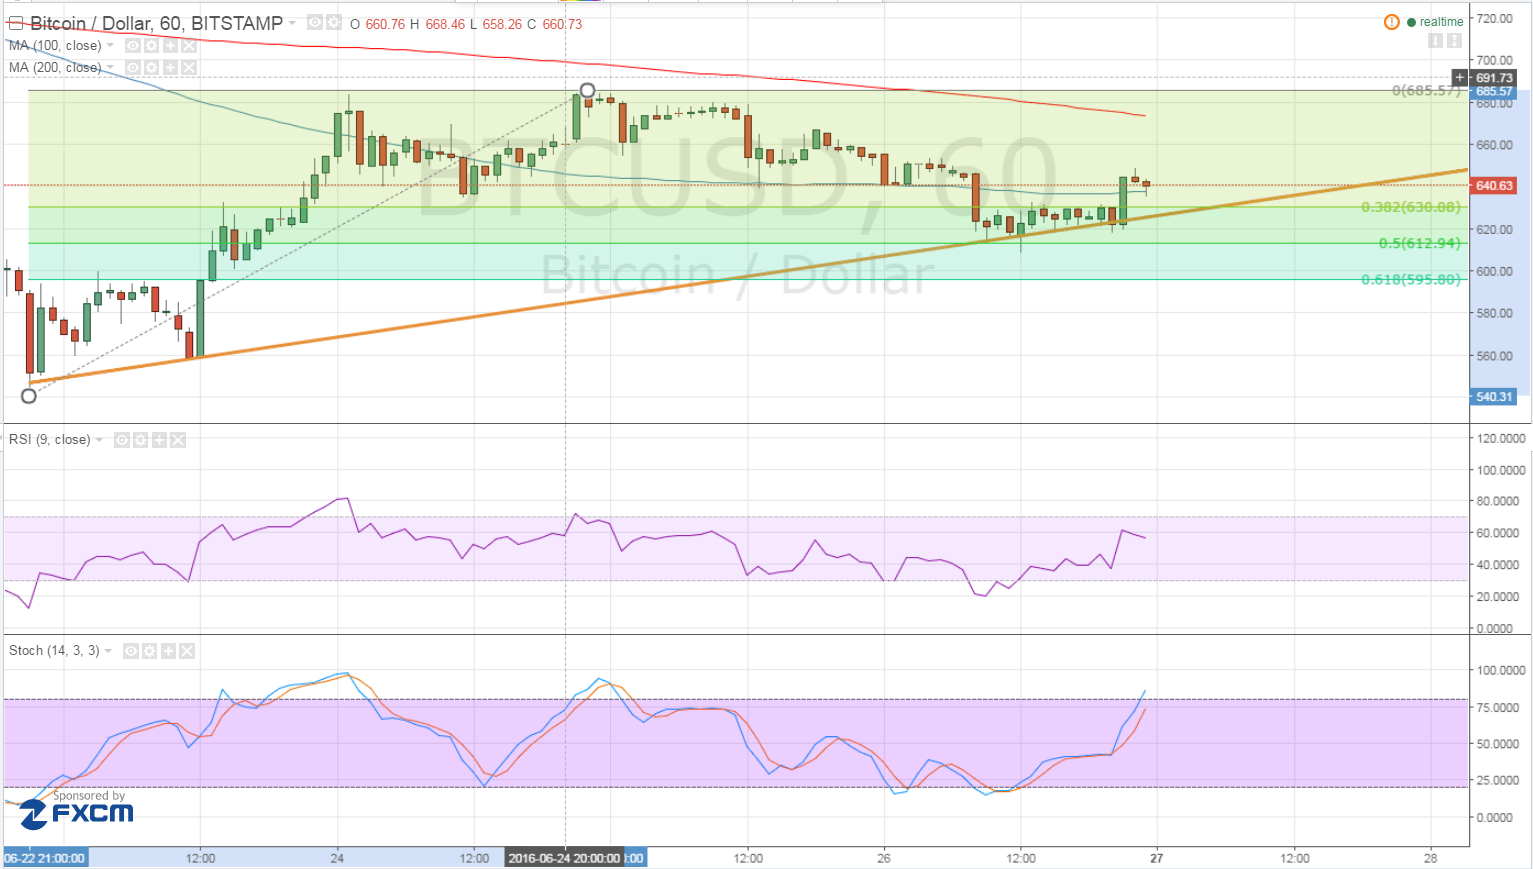 Bitcoin Price Technical Analysis for 06/27/2016 - Bulls Ready to Charge Again?